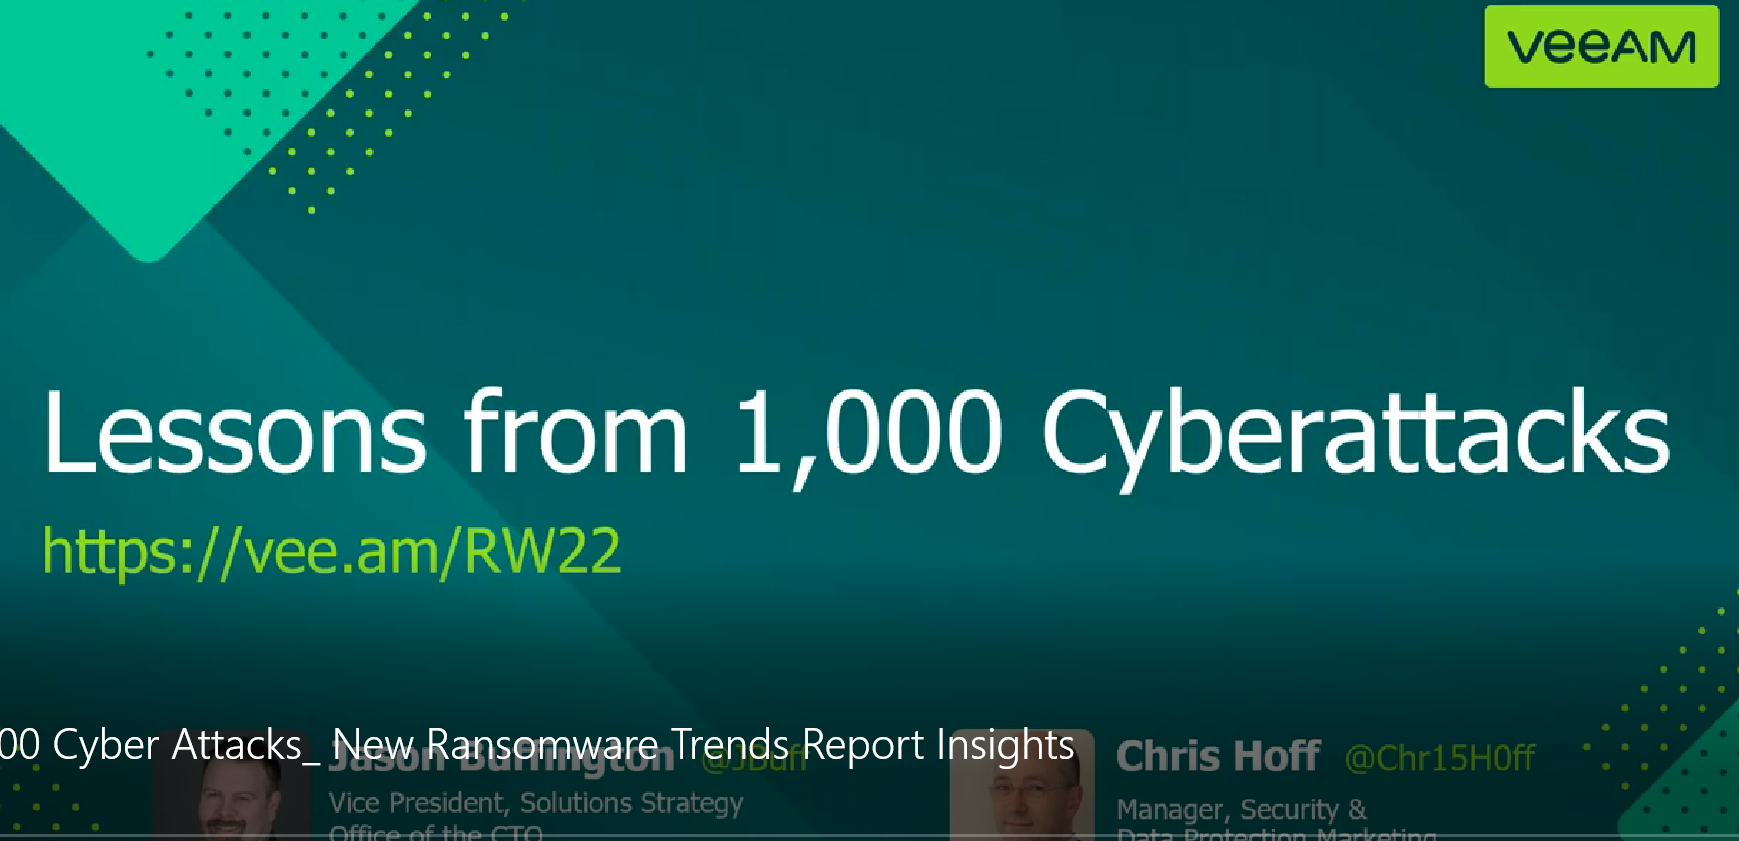 1,000 Cyber Attacks: New Ransomware Trends Report Insights